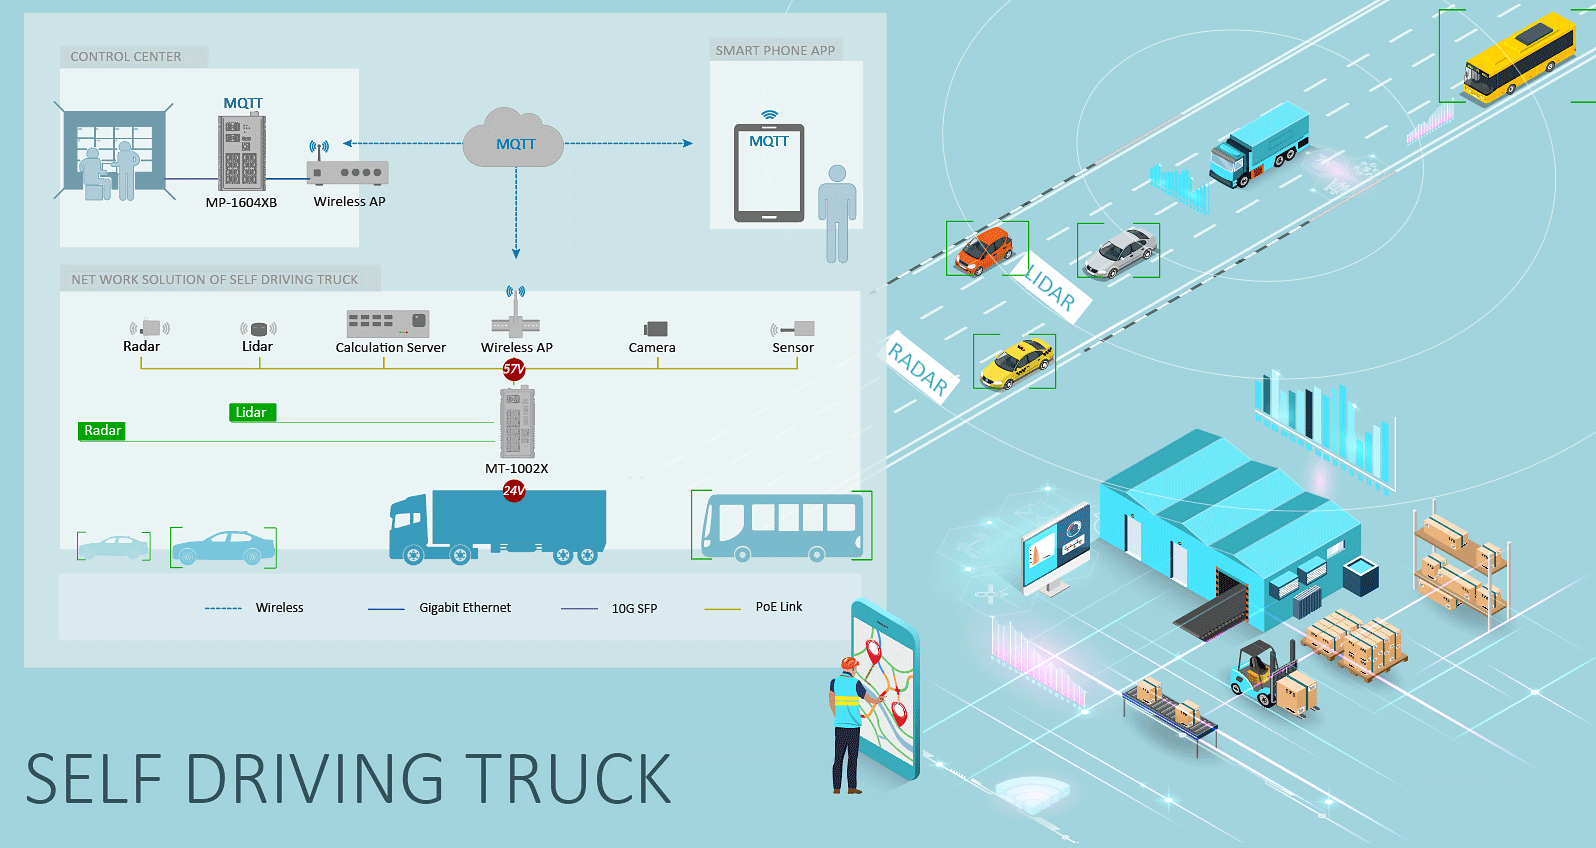 Self Driving Truck Industrial Networking Equipment in Harsh Environment